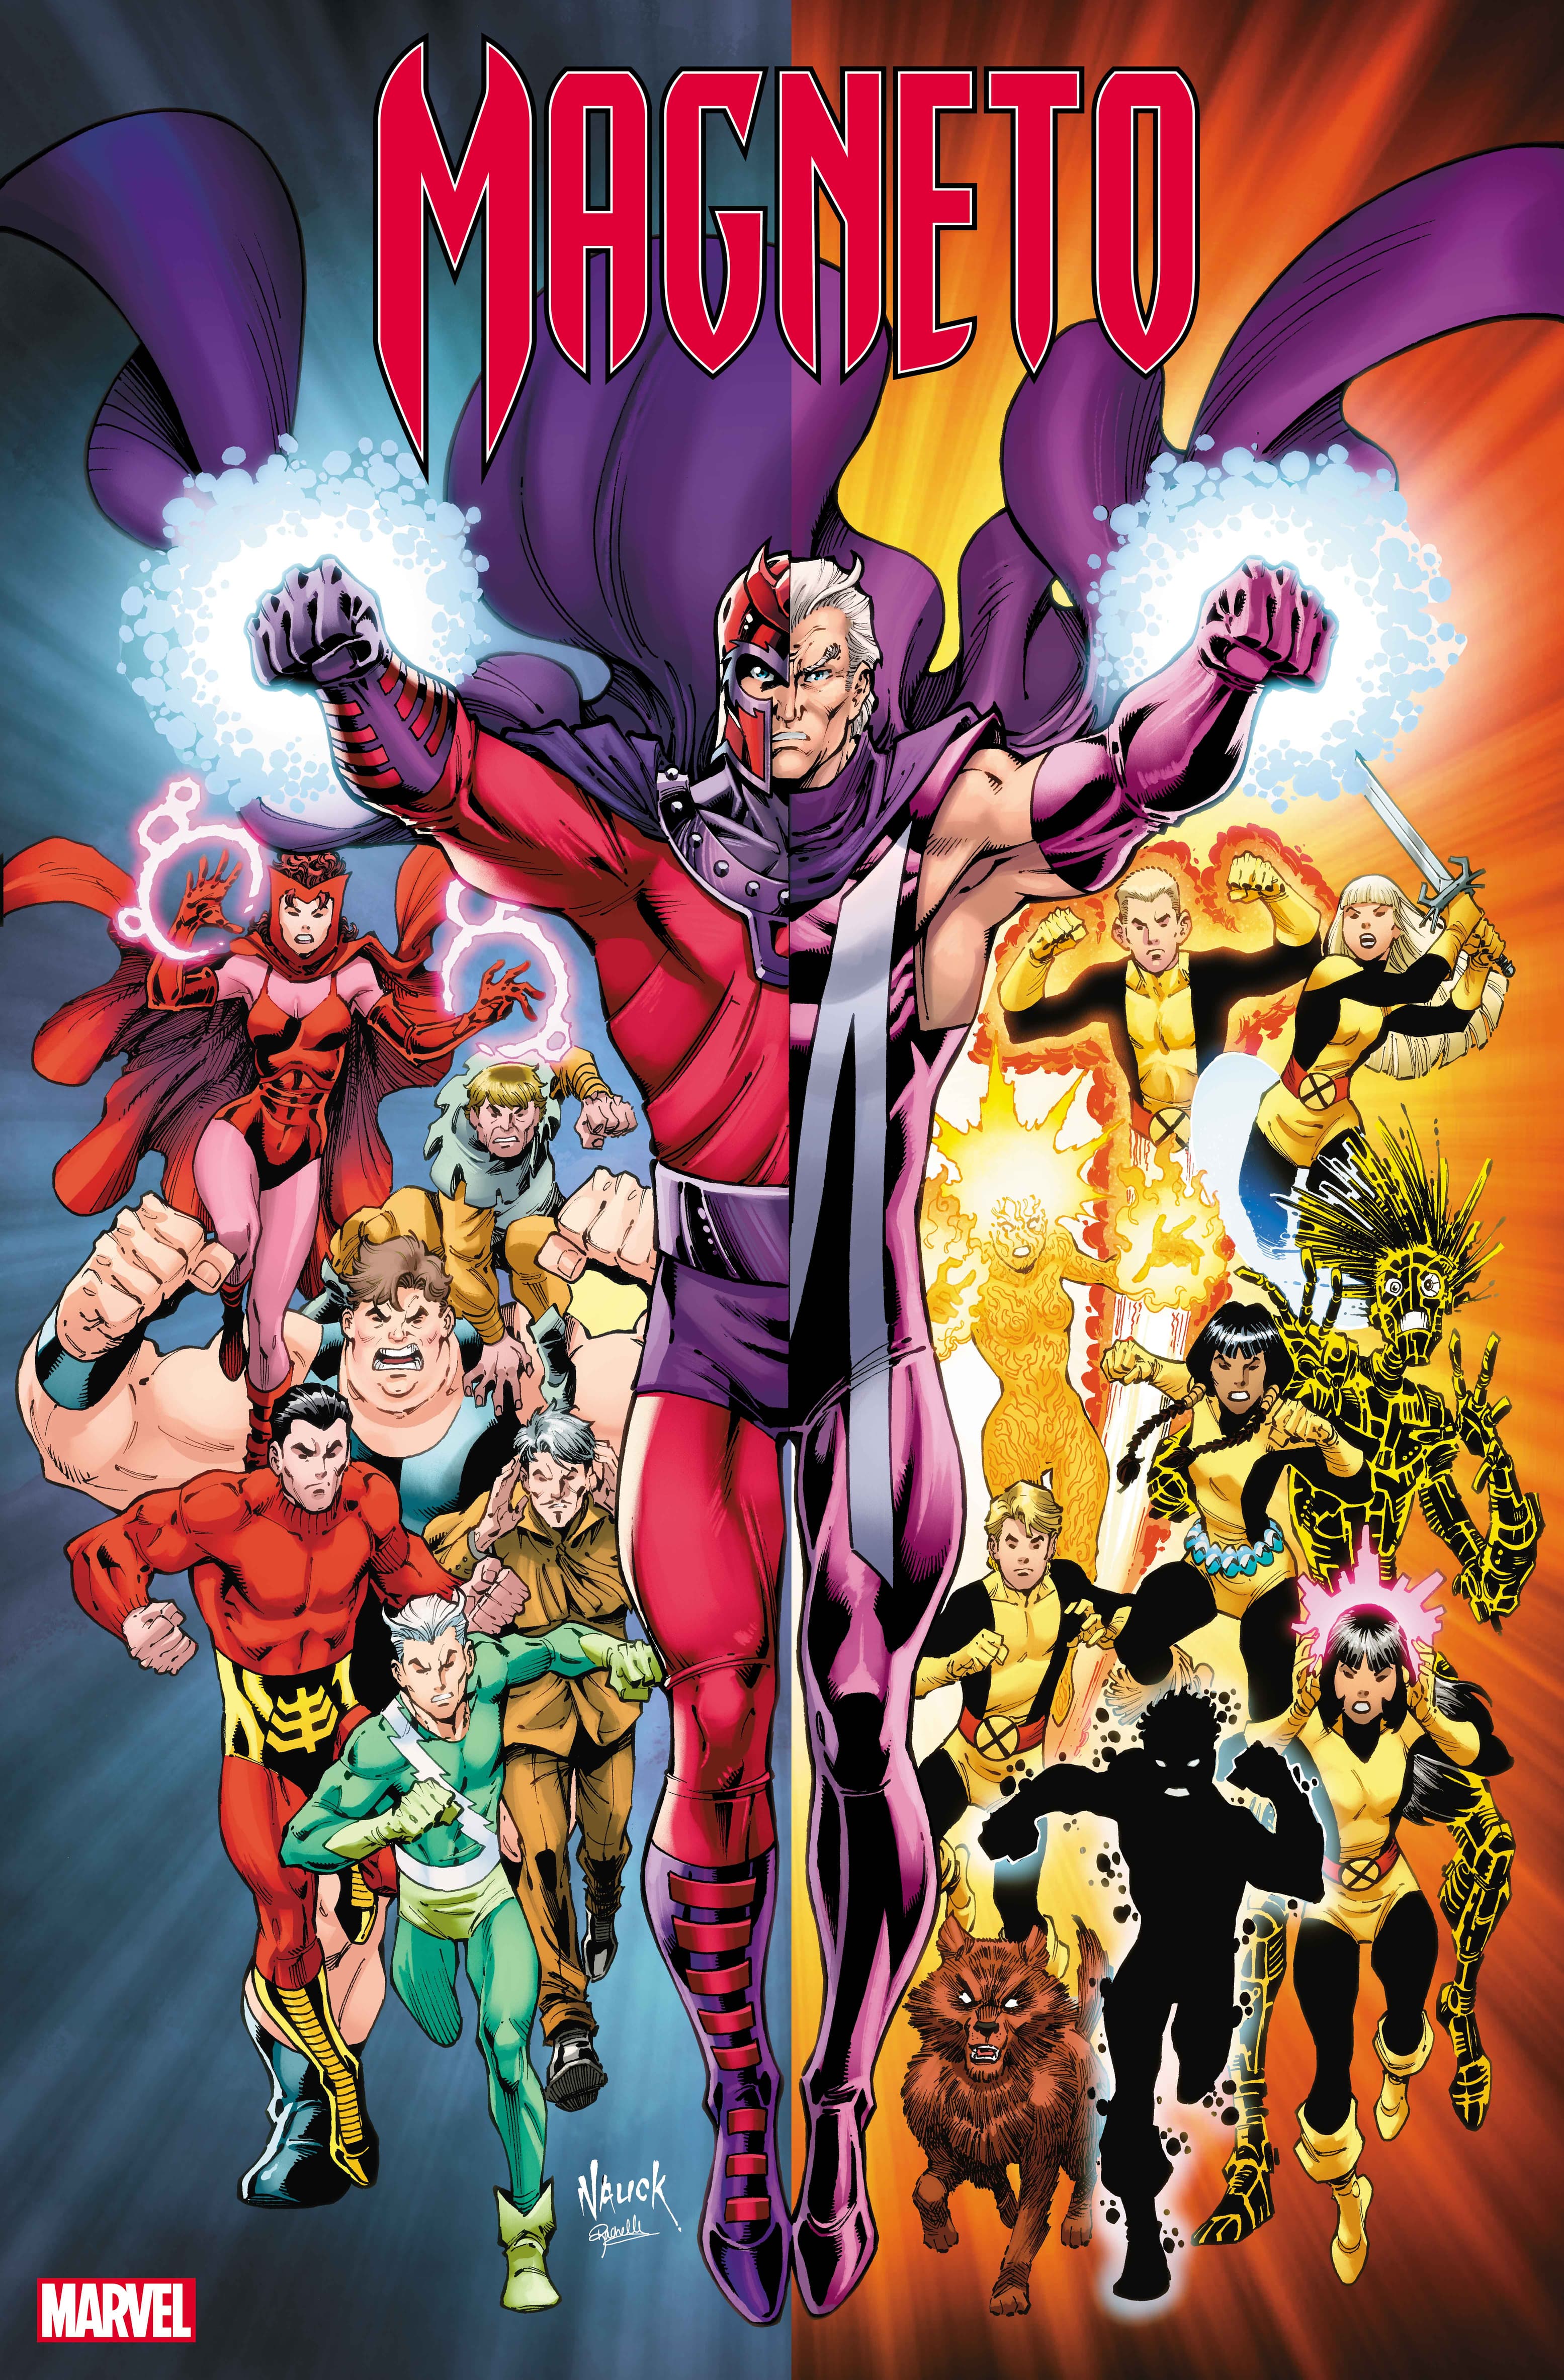 Magneto #1 Cover by Todd Nauck